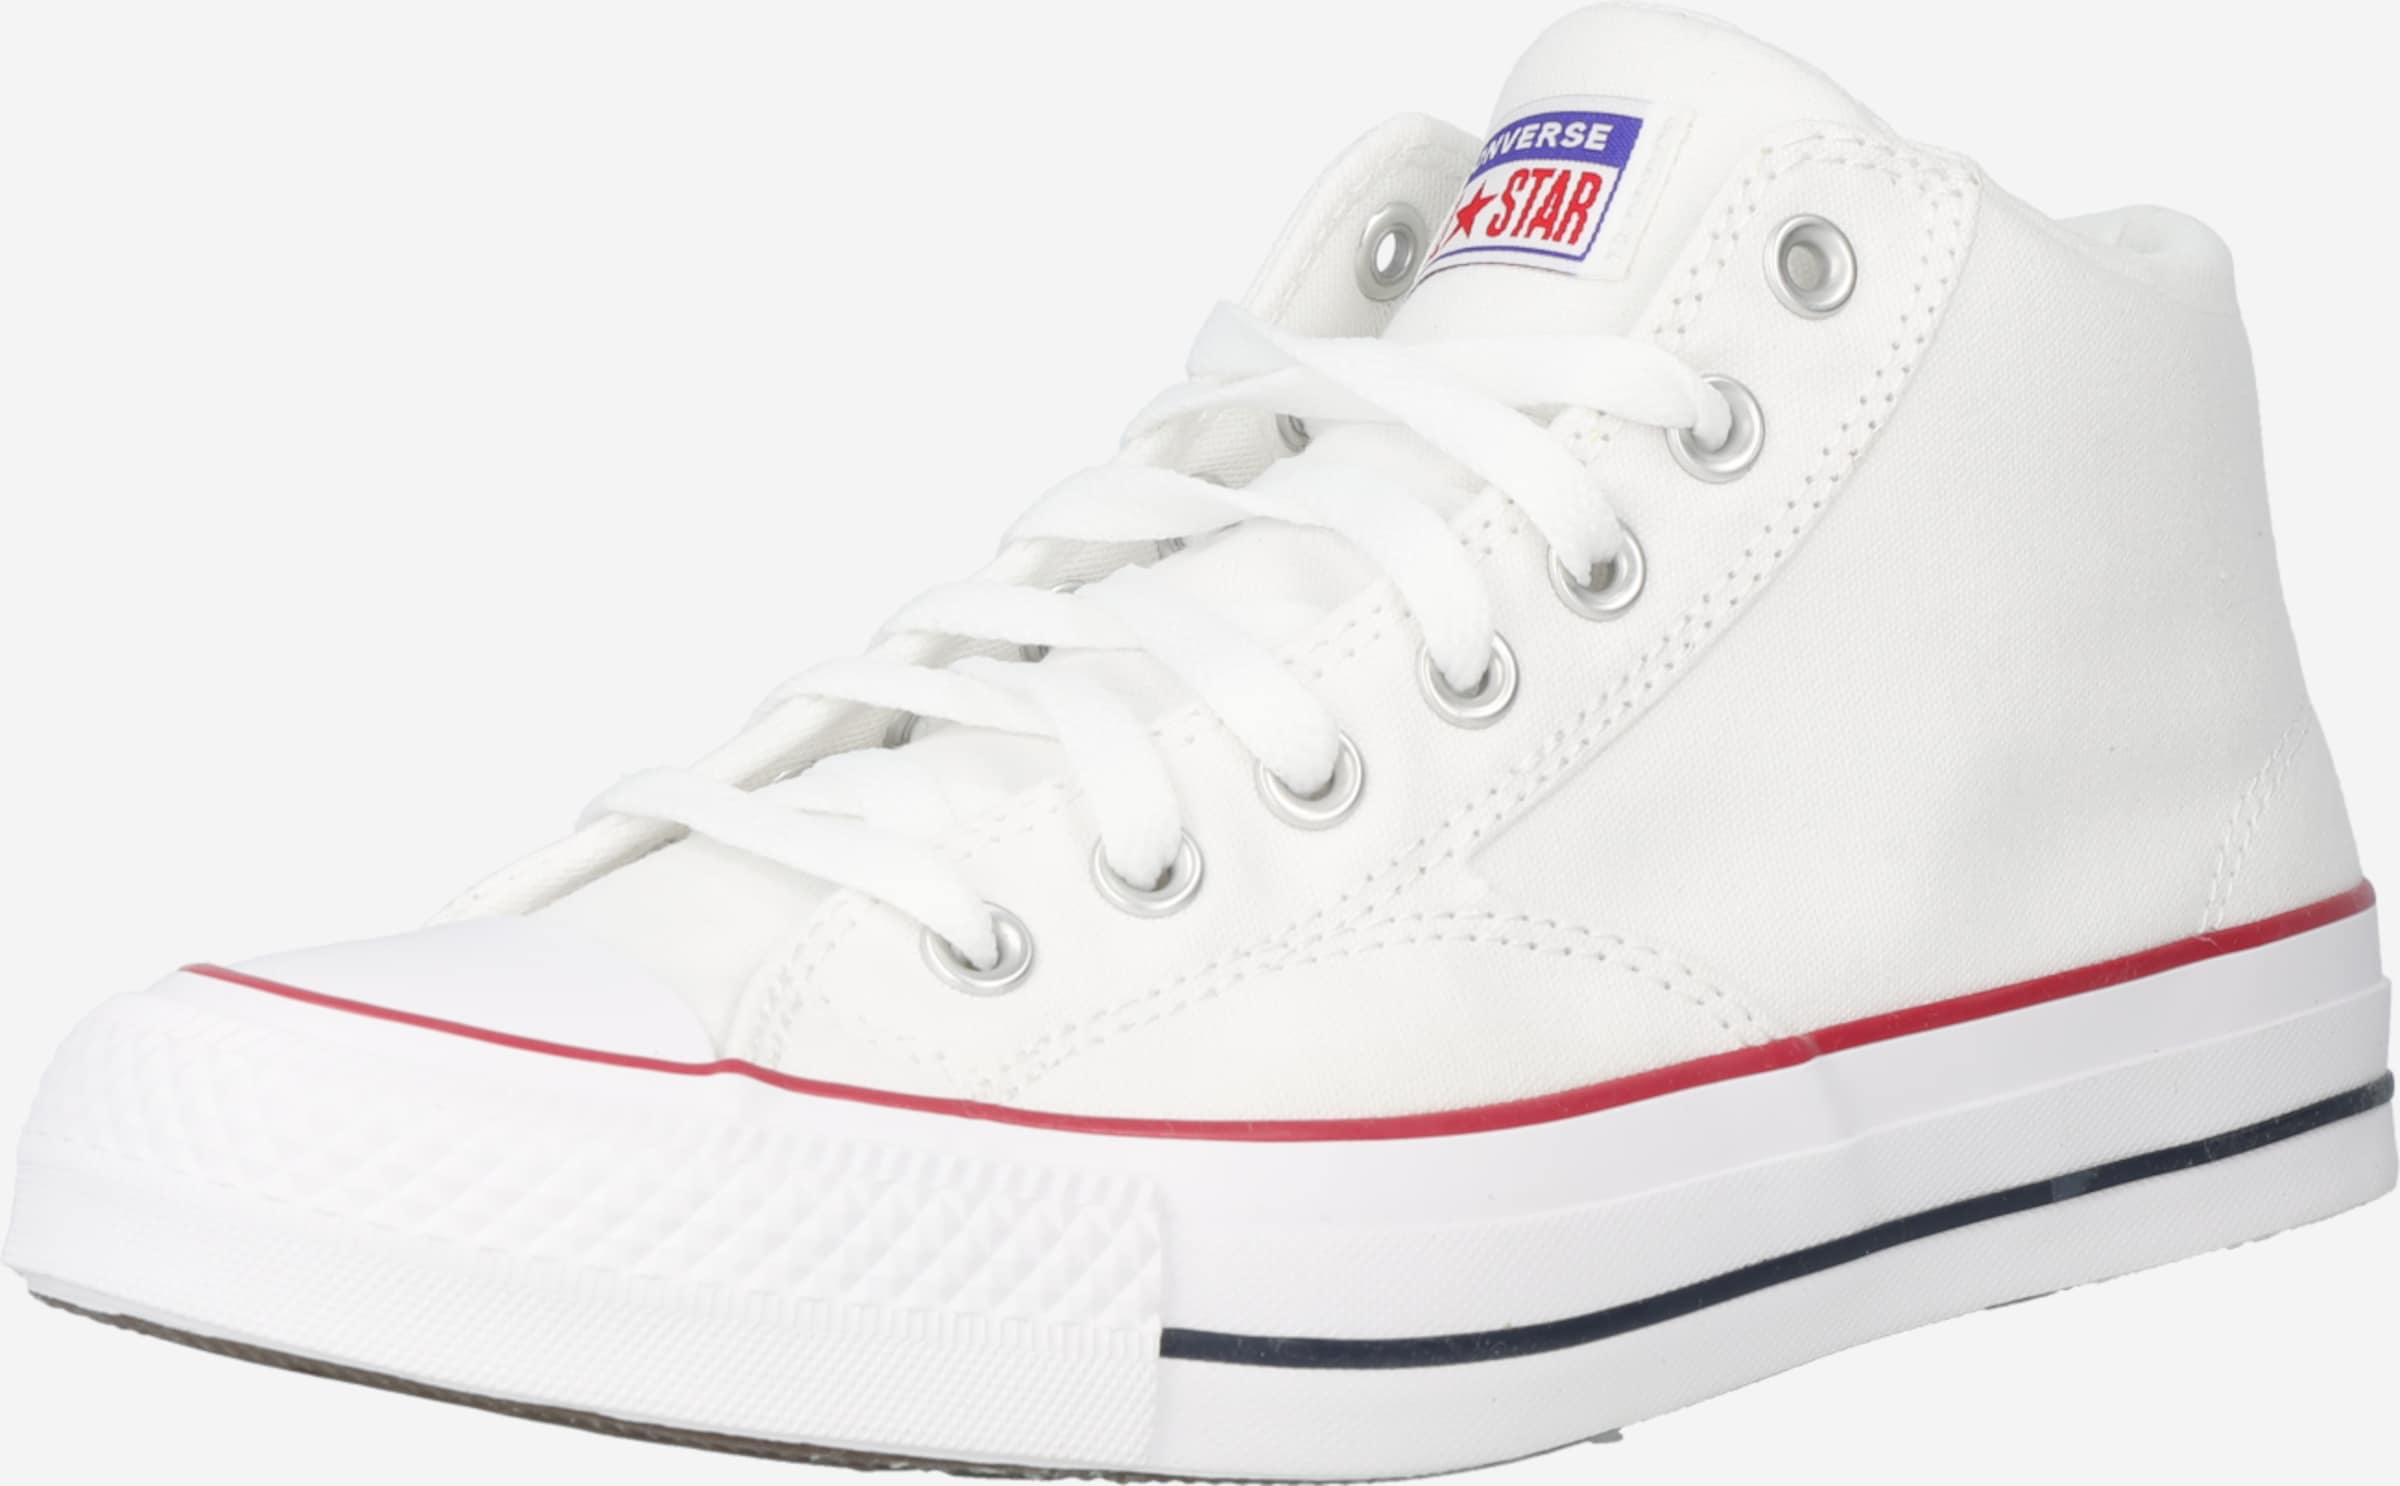 Weiß Taylor CONVERSE in Star Malden ABOUT All YOU Sneaker Street\' | \'Chuck